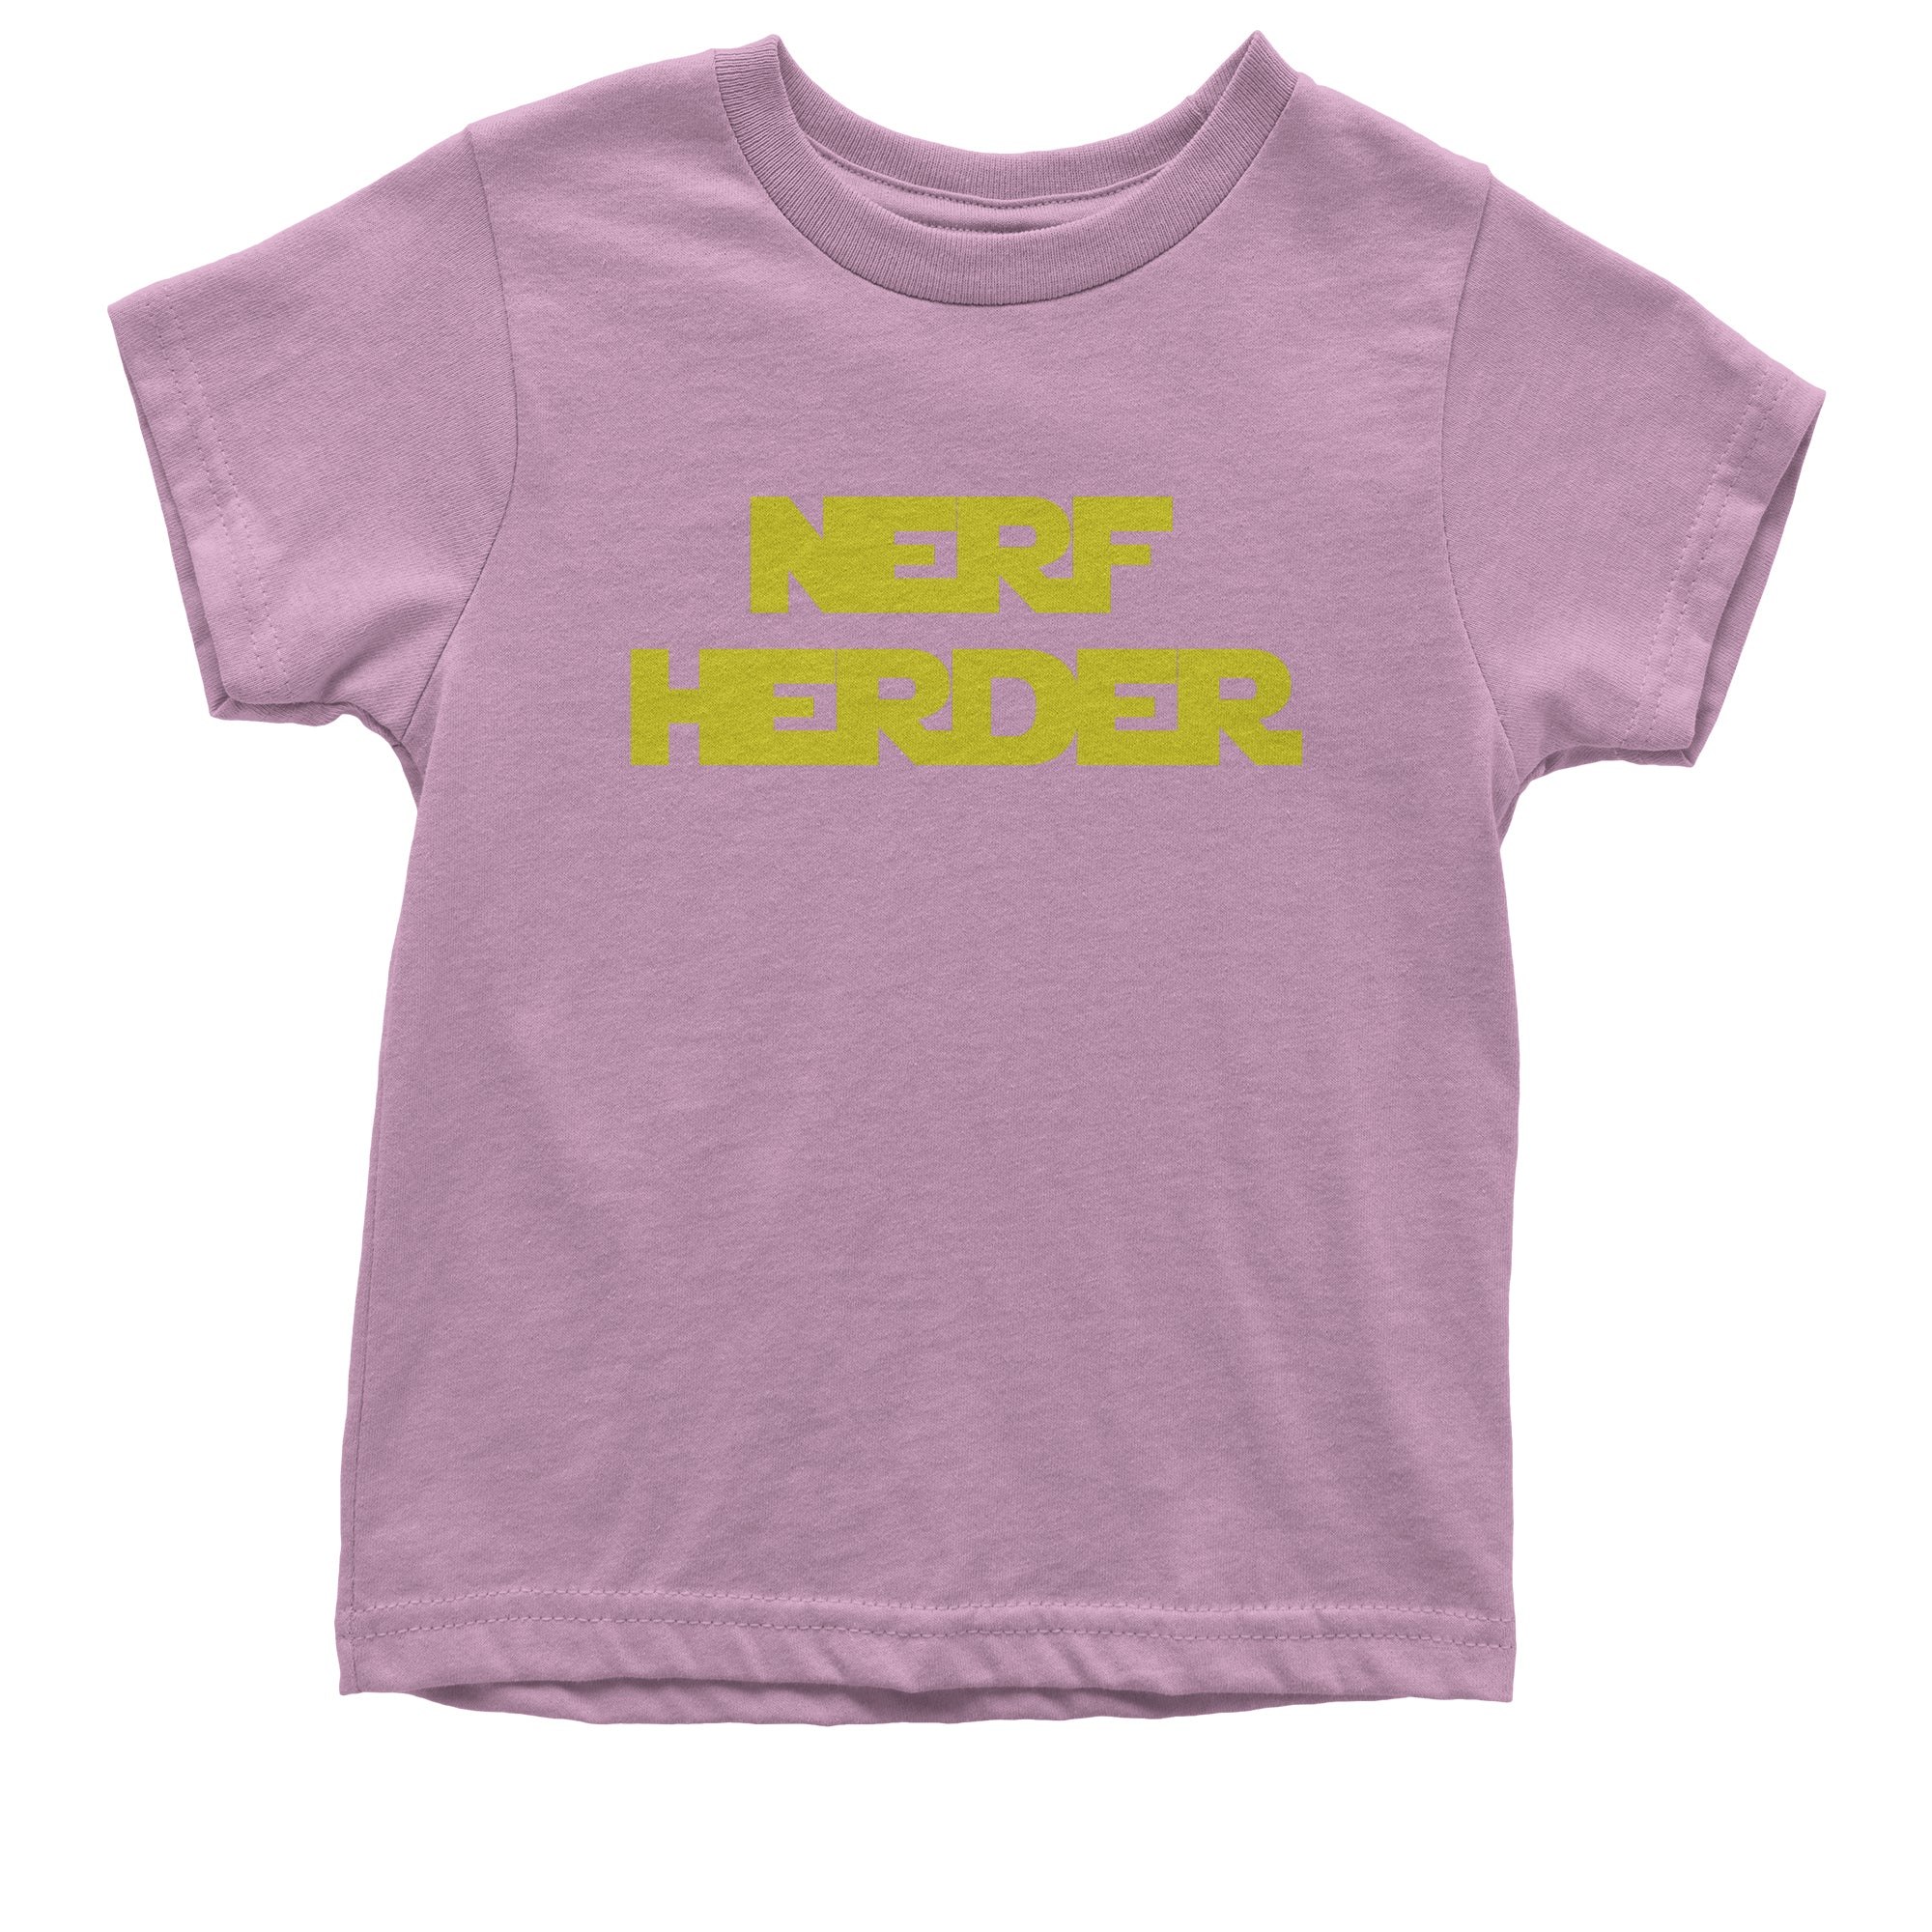 Solo Nerf Herder Quote Kid's T-Shirt